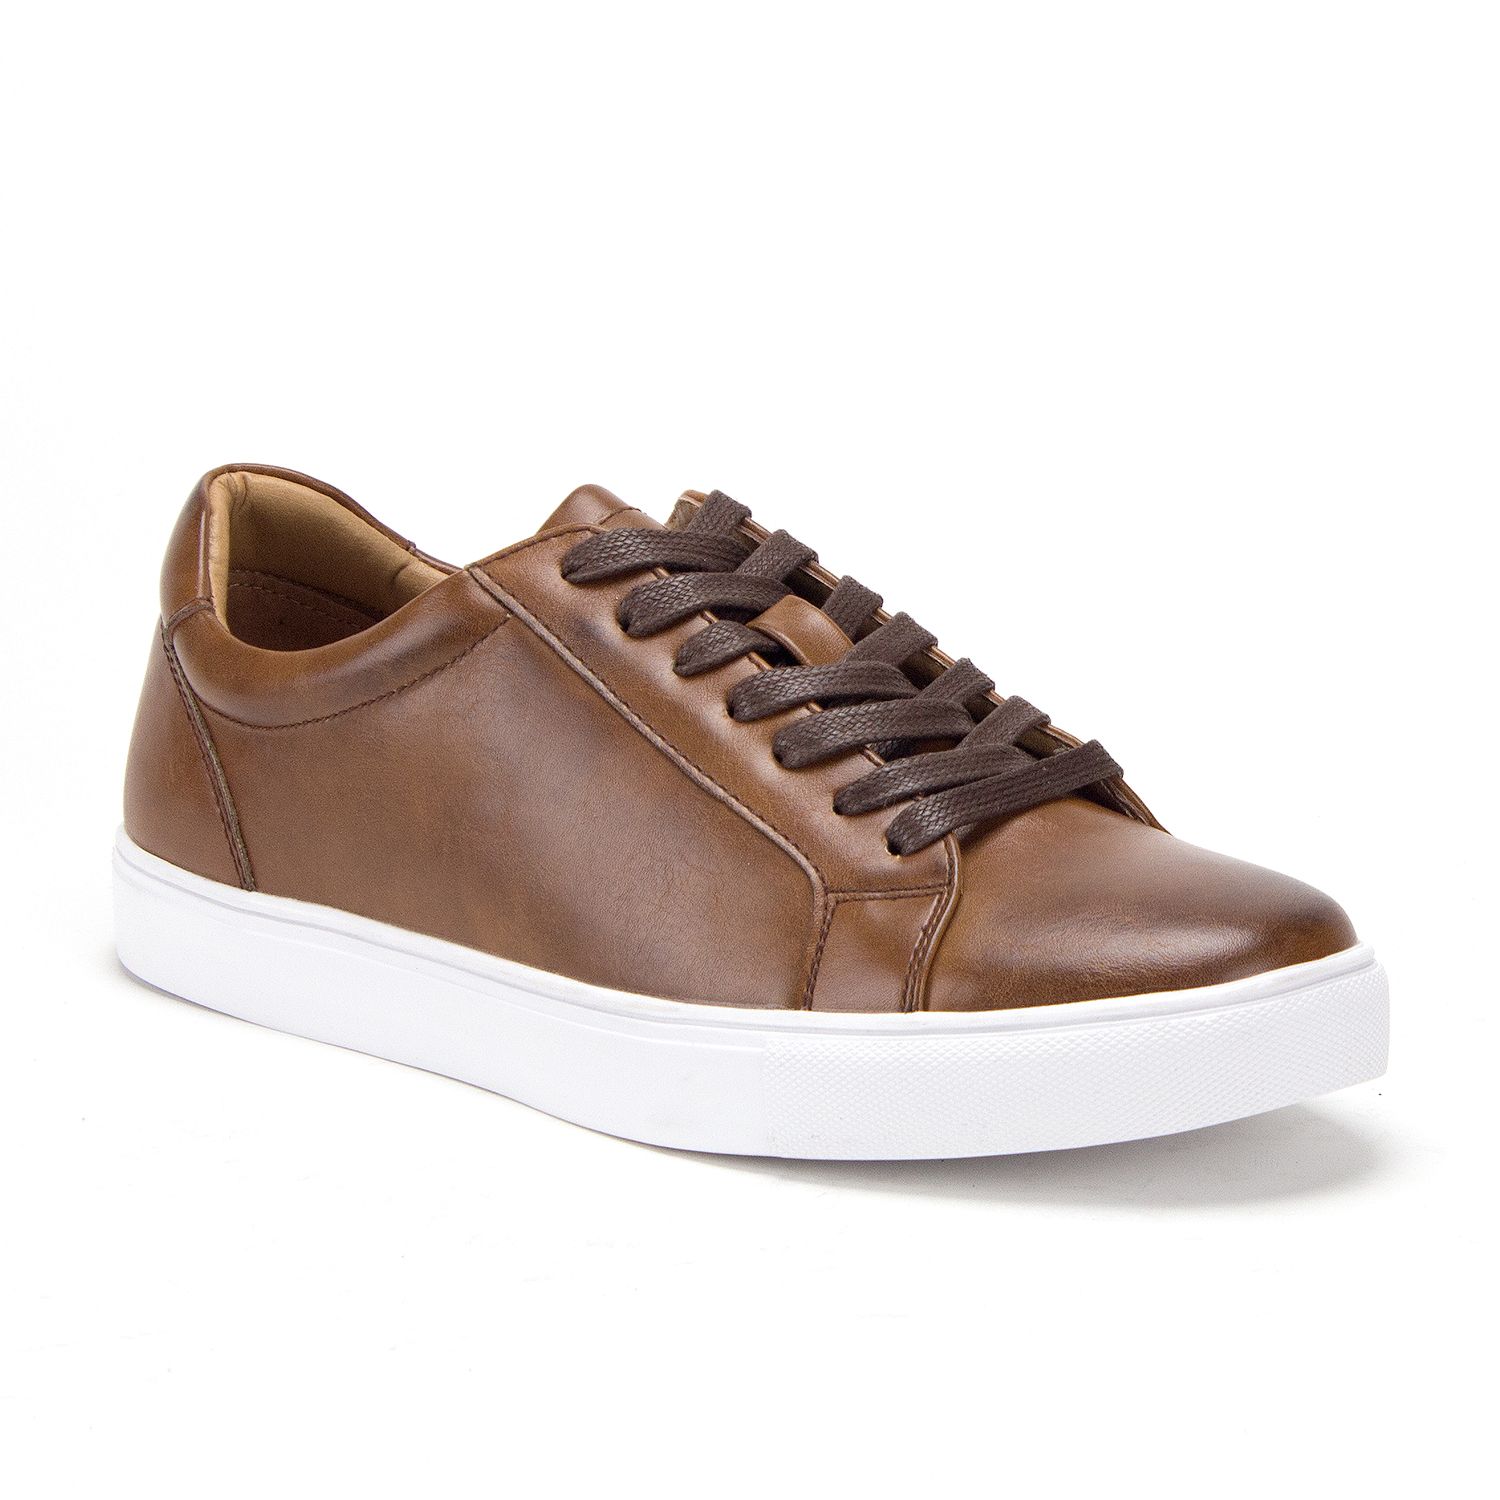 Men's S-1811 Classic Lace Up Plimsoll Skate Sneakers Shoes, Tan, 8 - image 1 of 4